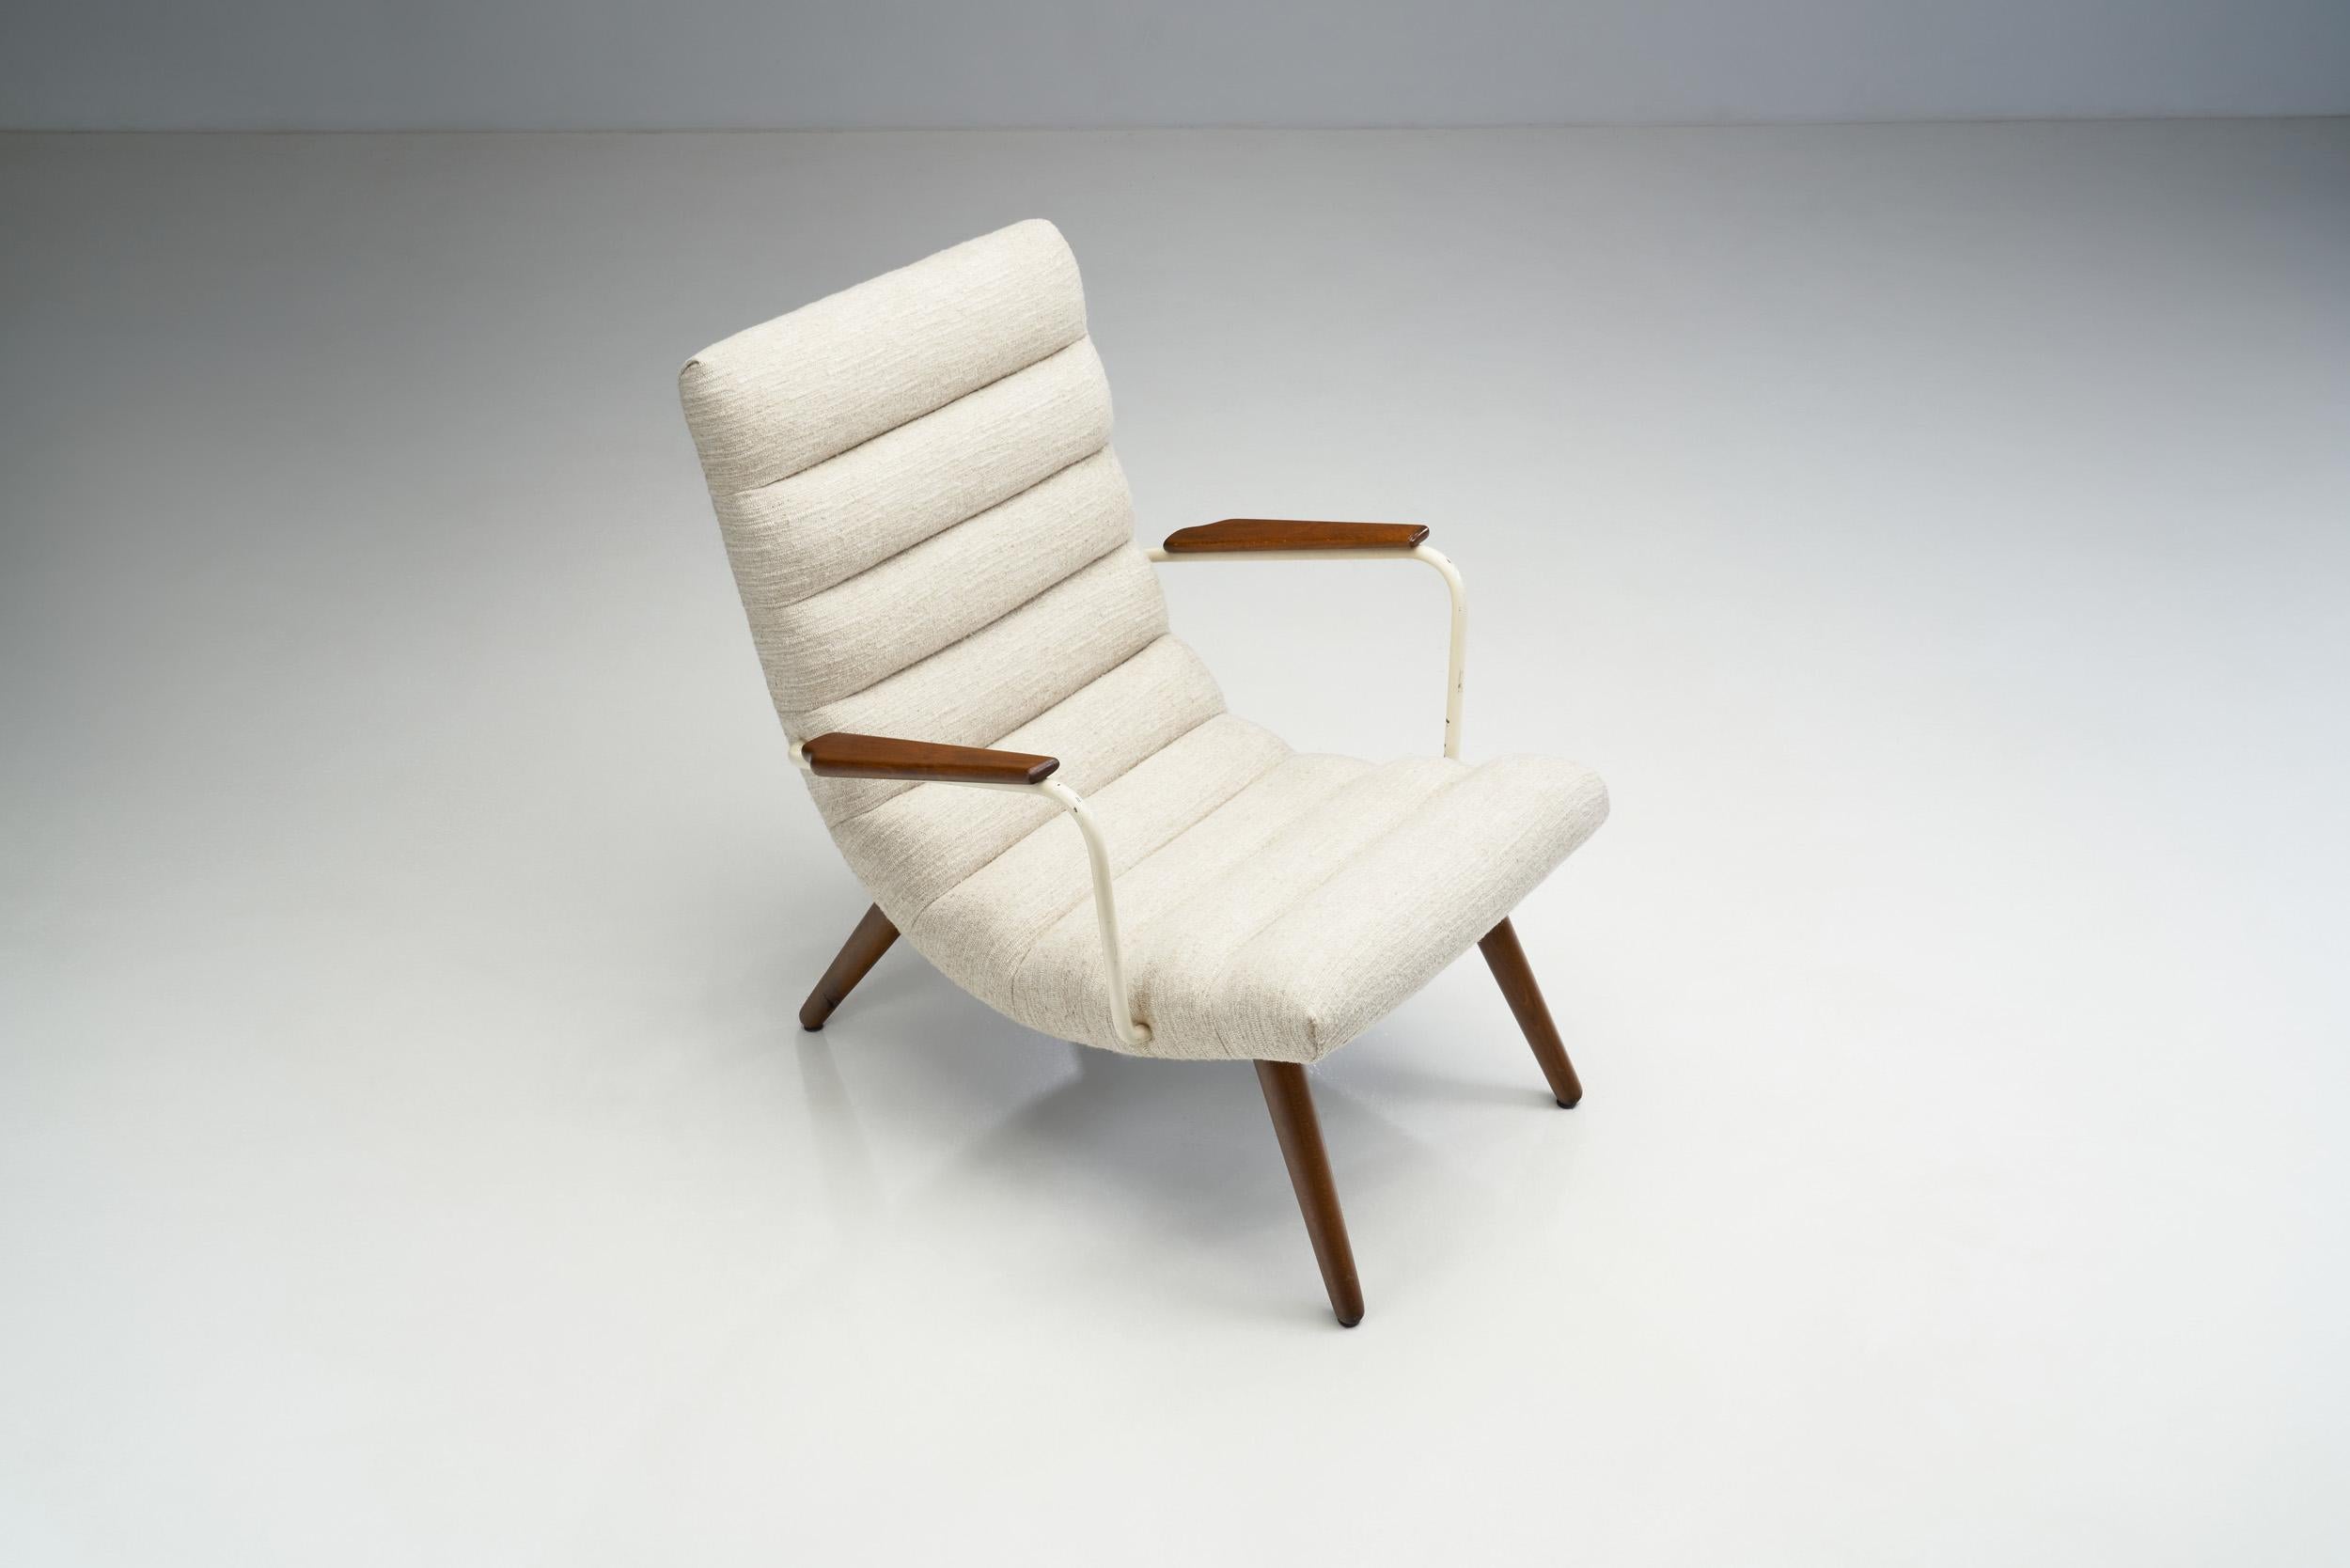 European Mid-Century Modern Lounge Chair, Europe 1950s For Sale 3